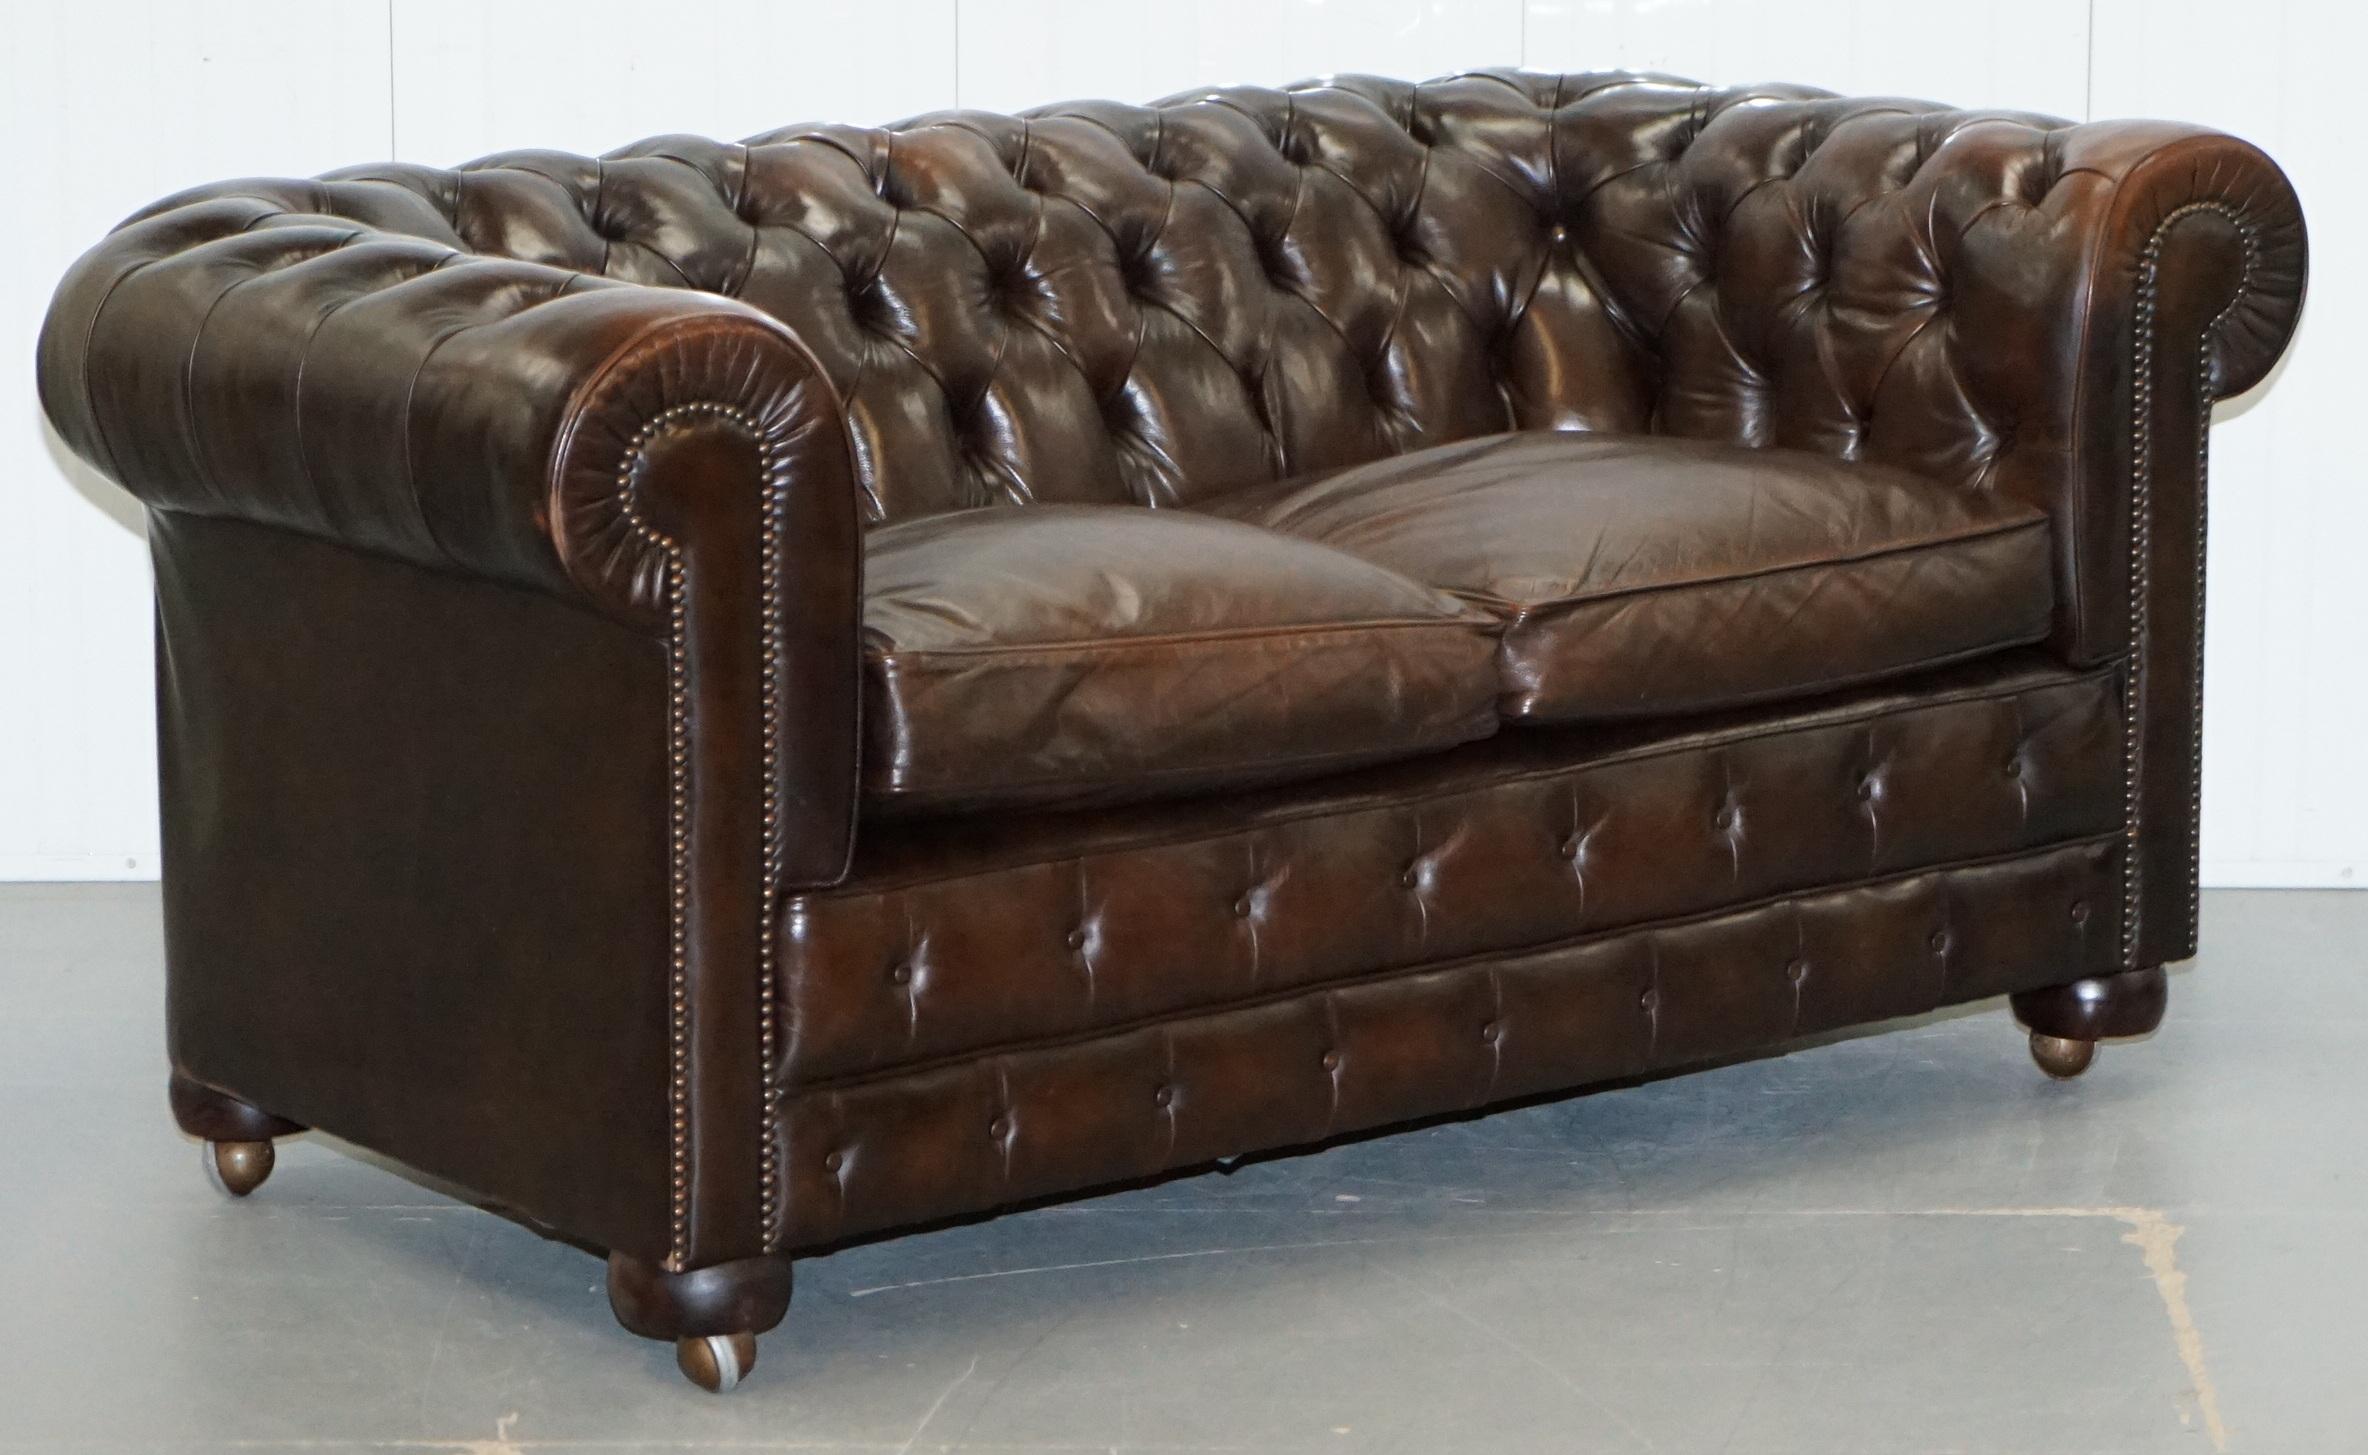 We are delighted to offer for sale this very nice Vintage brown leather Chesterfield sofa with original coil sprung front edge and feather filled cushions 

This sofa is a rare model, its fully sprung on the front panel which sits behind your